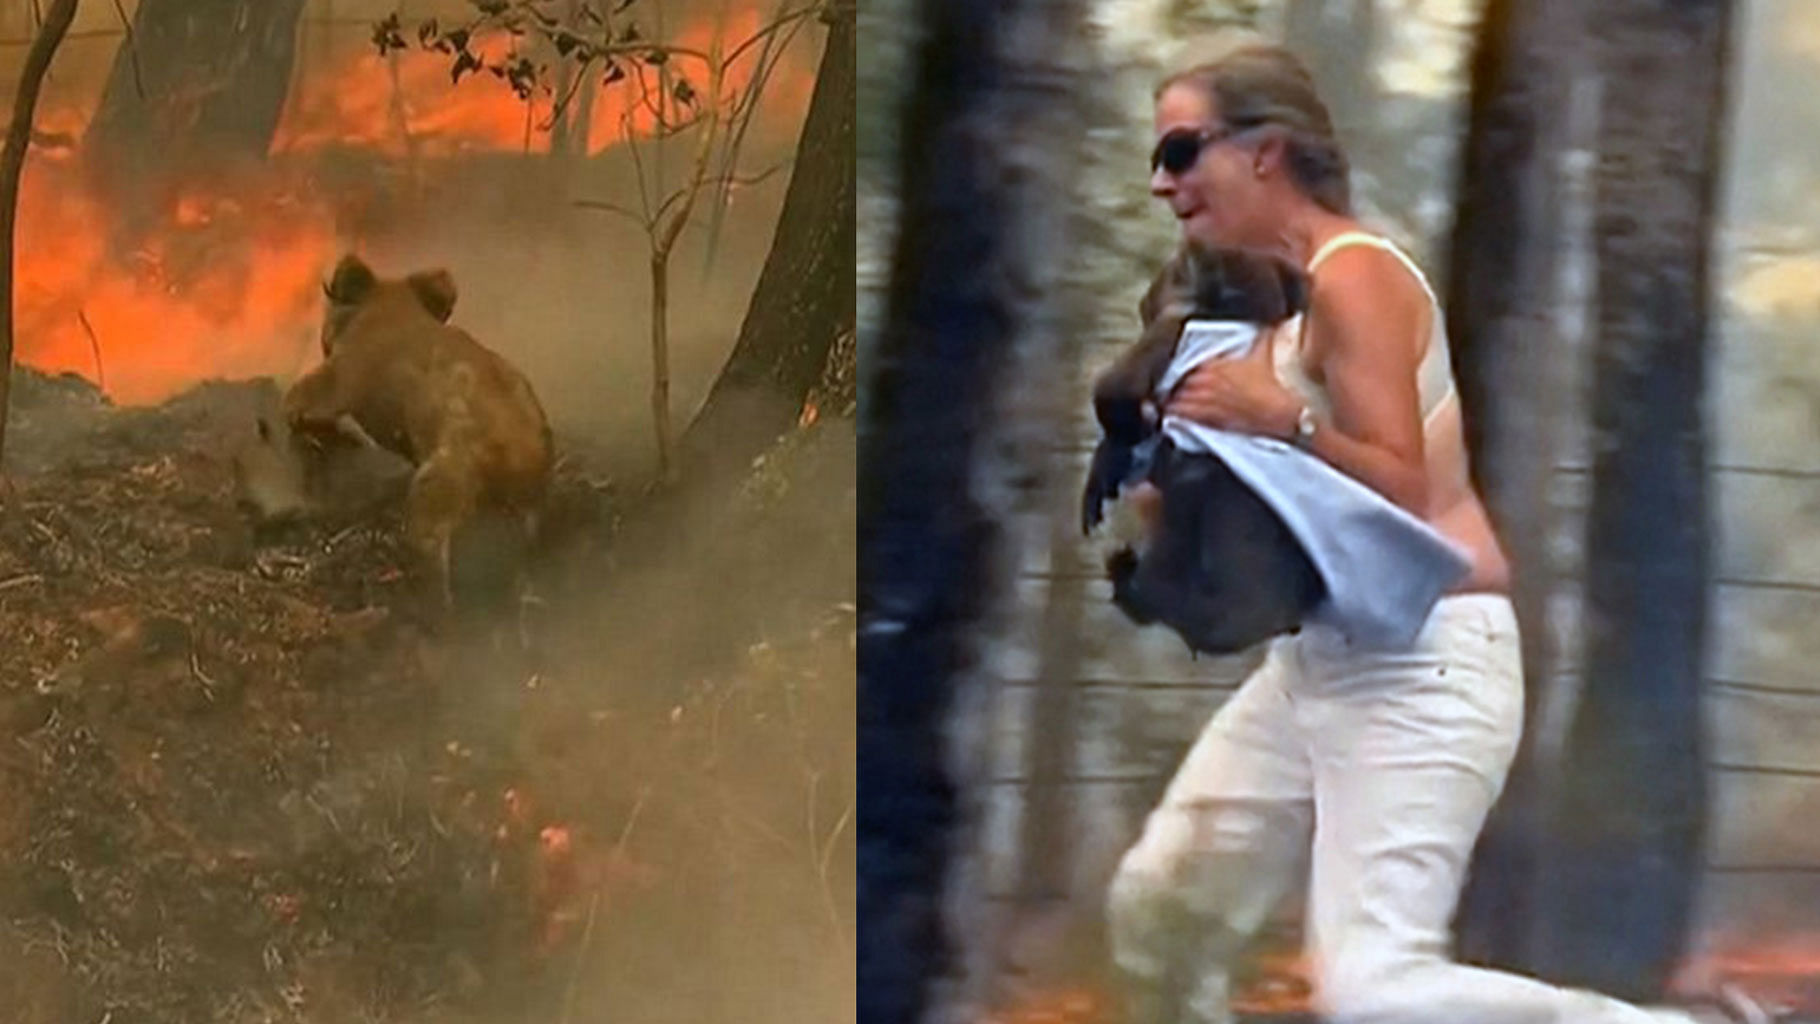 Video of the daring rescue — which shows Toni Doherty using her shirt to wrap up the koala — was viewed globally.